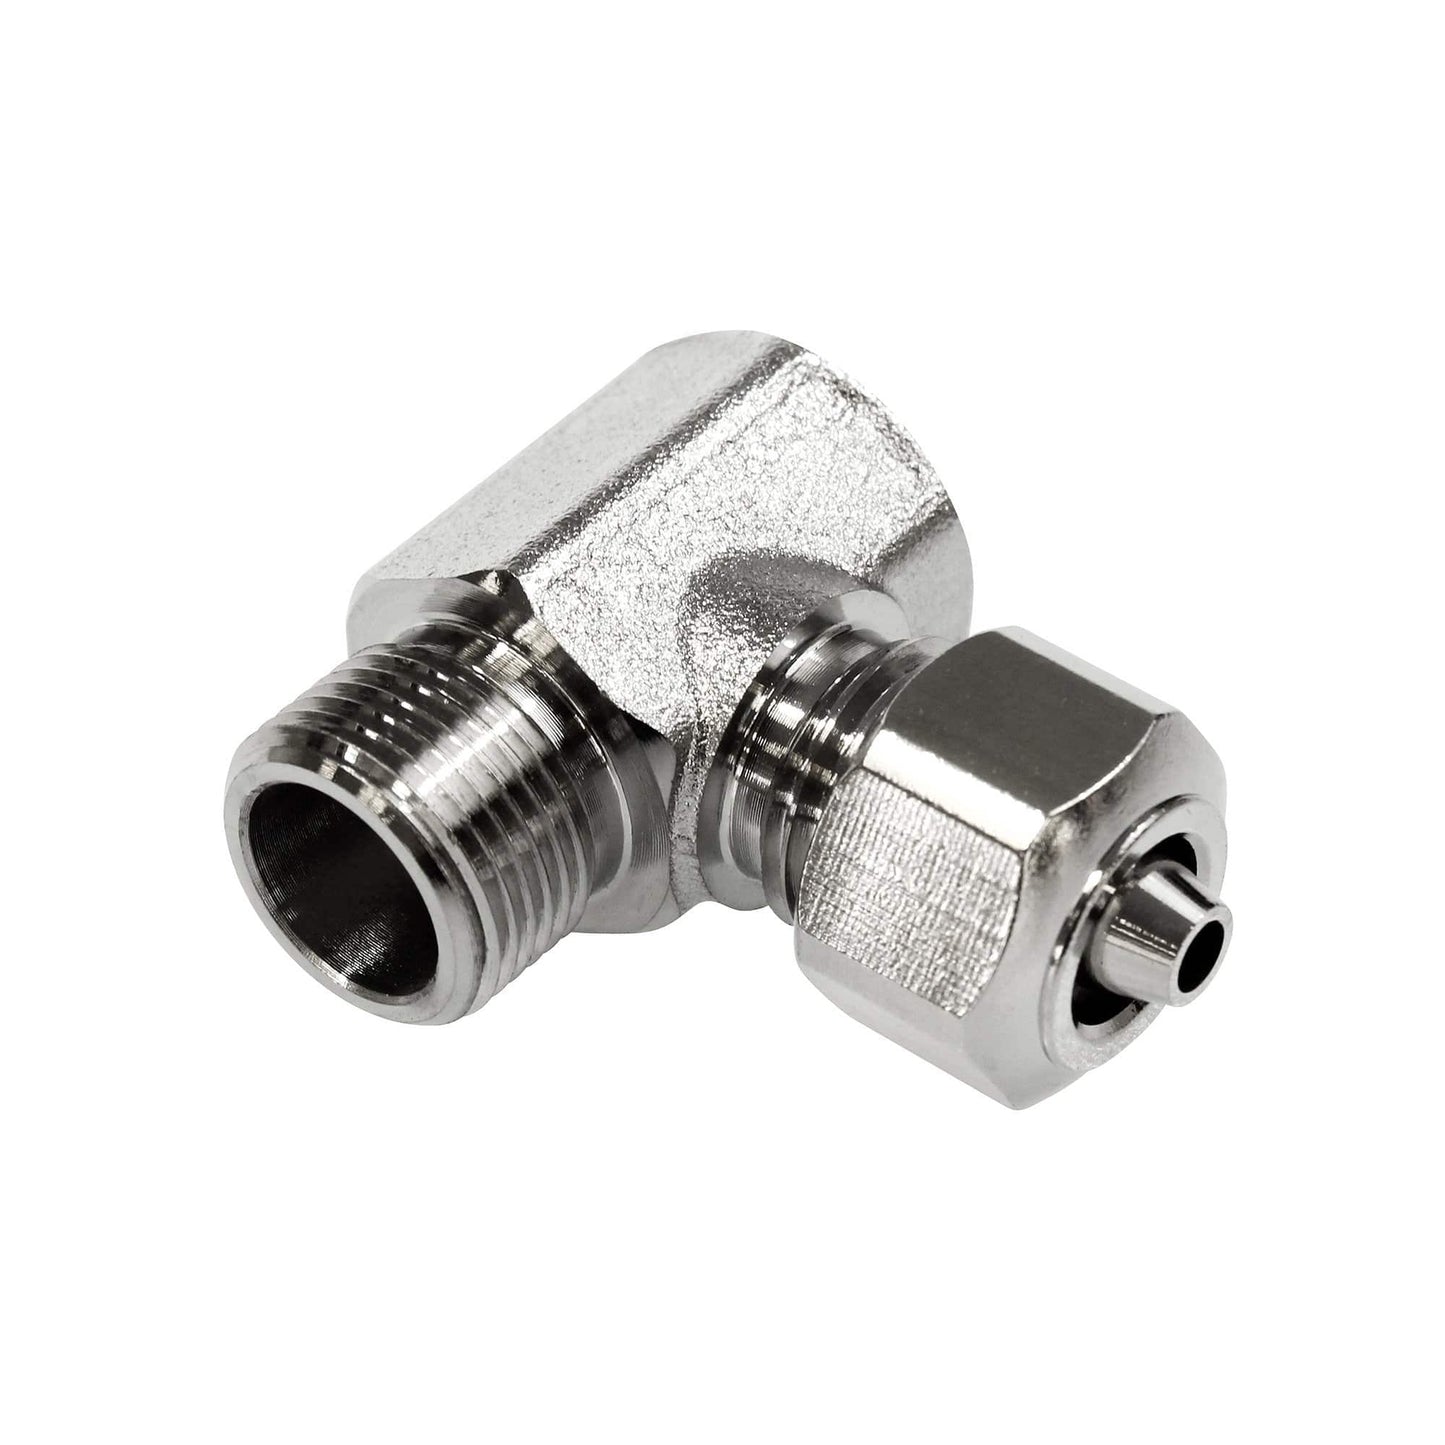 3/8” Hot Water Metal T-Adapter, angled view